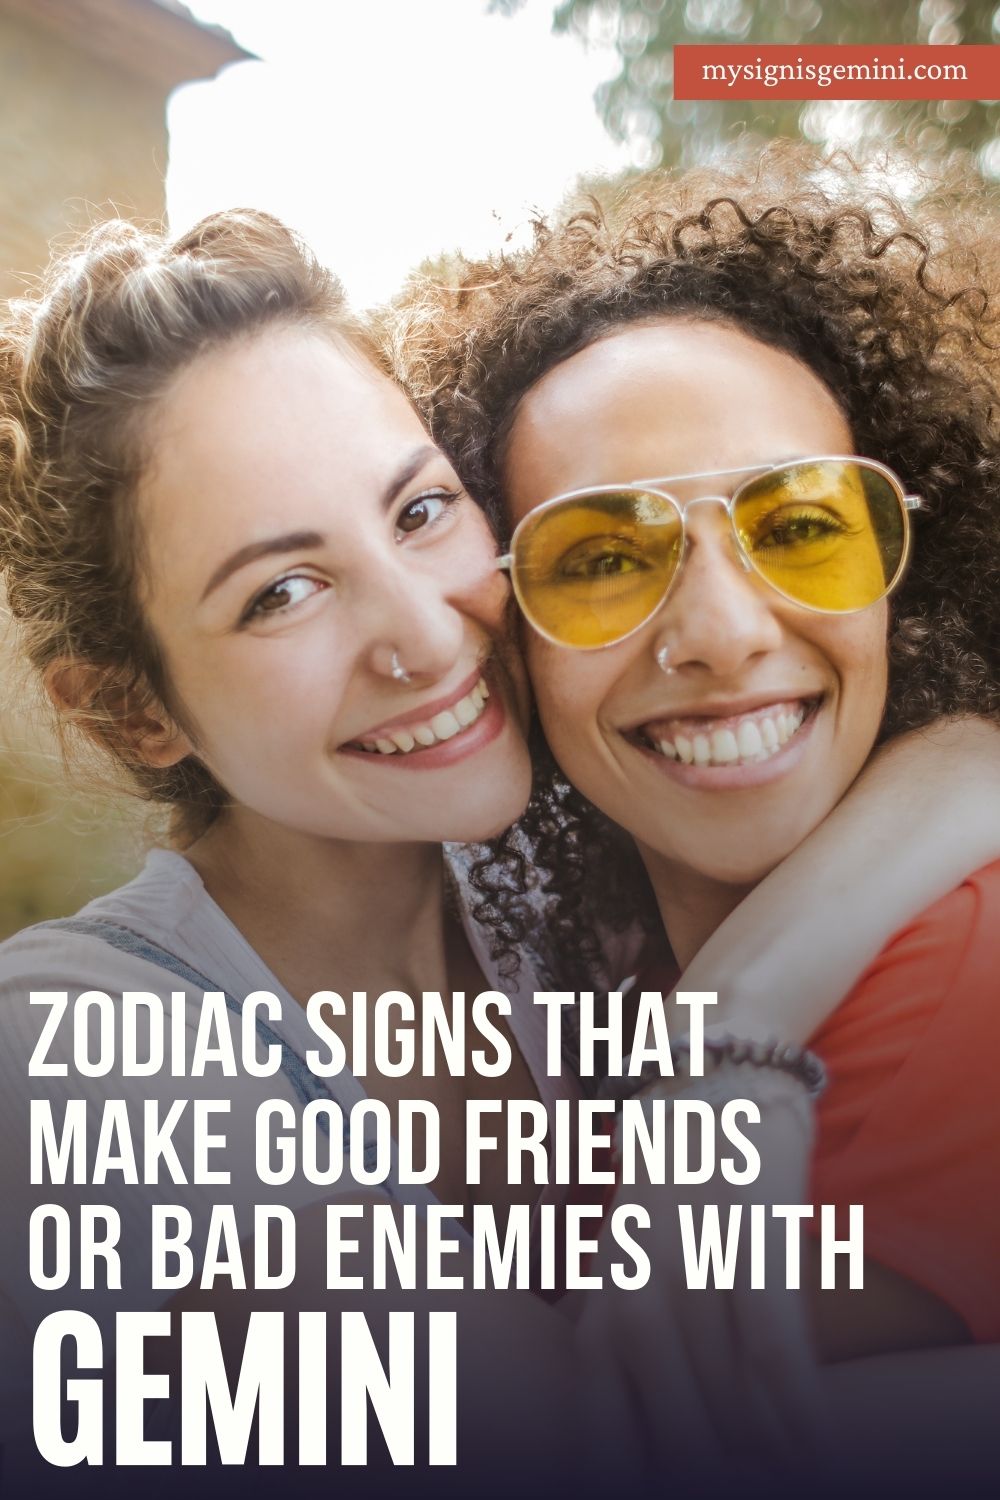 Zodiac Signs That Make Good Friends or Bad Enemies for a Gemini Sign